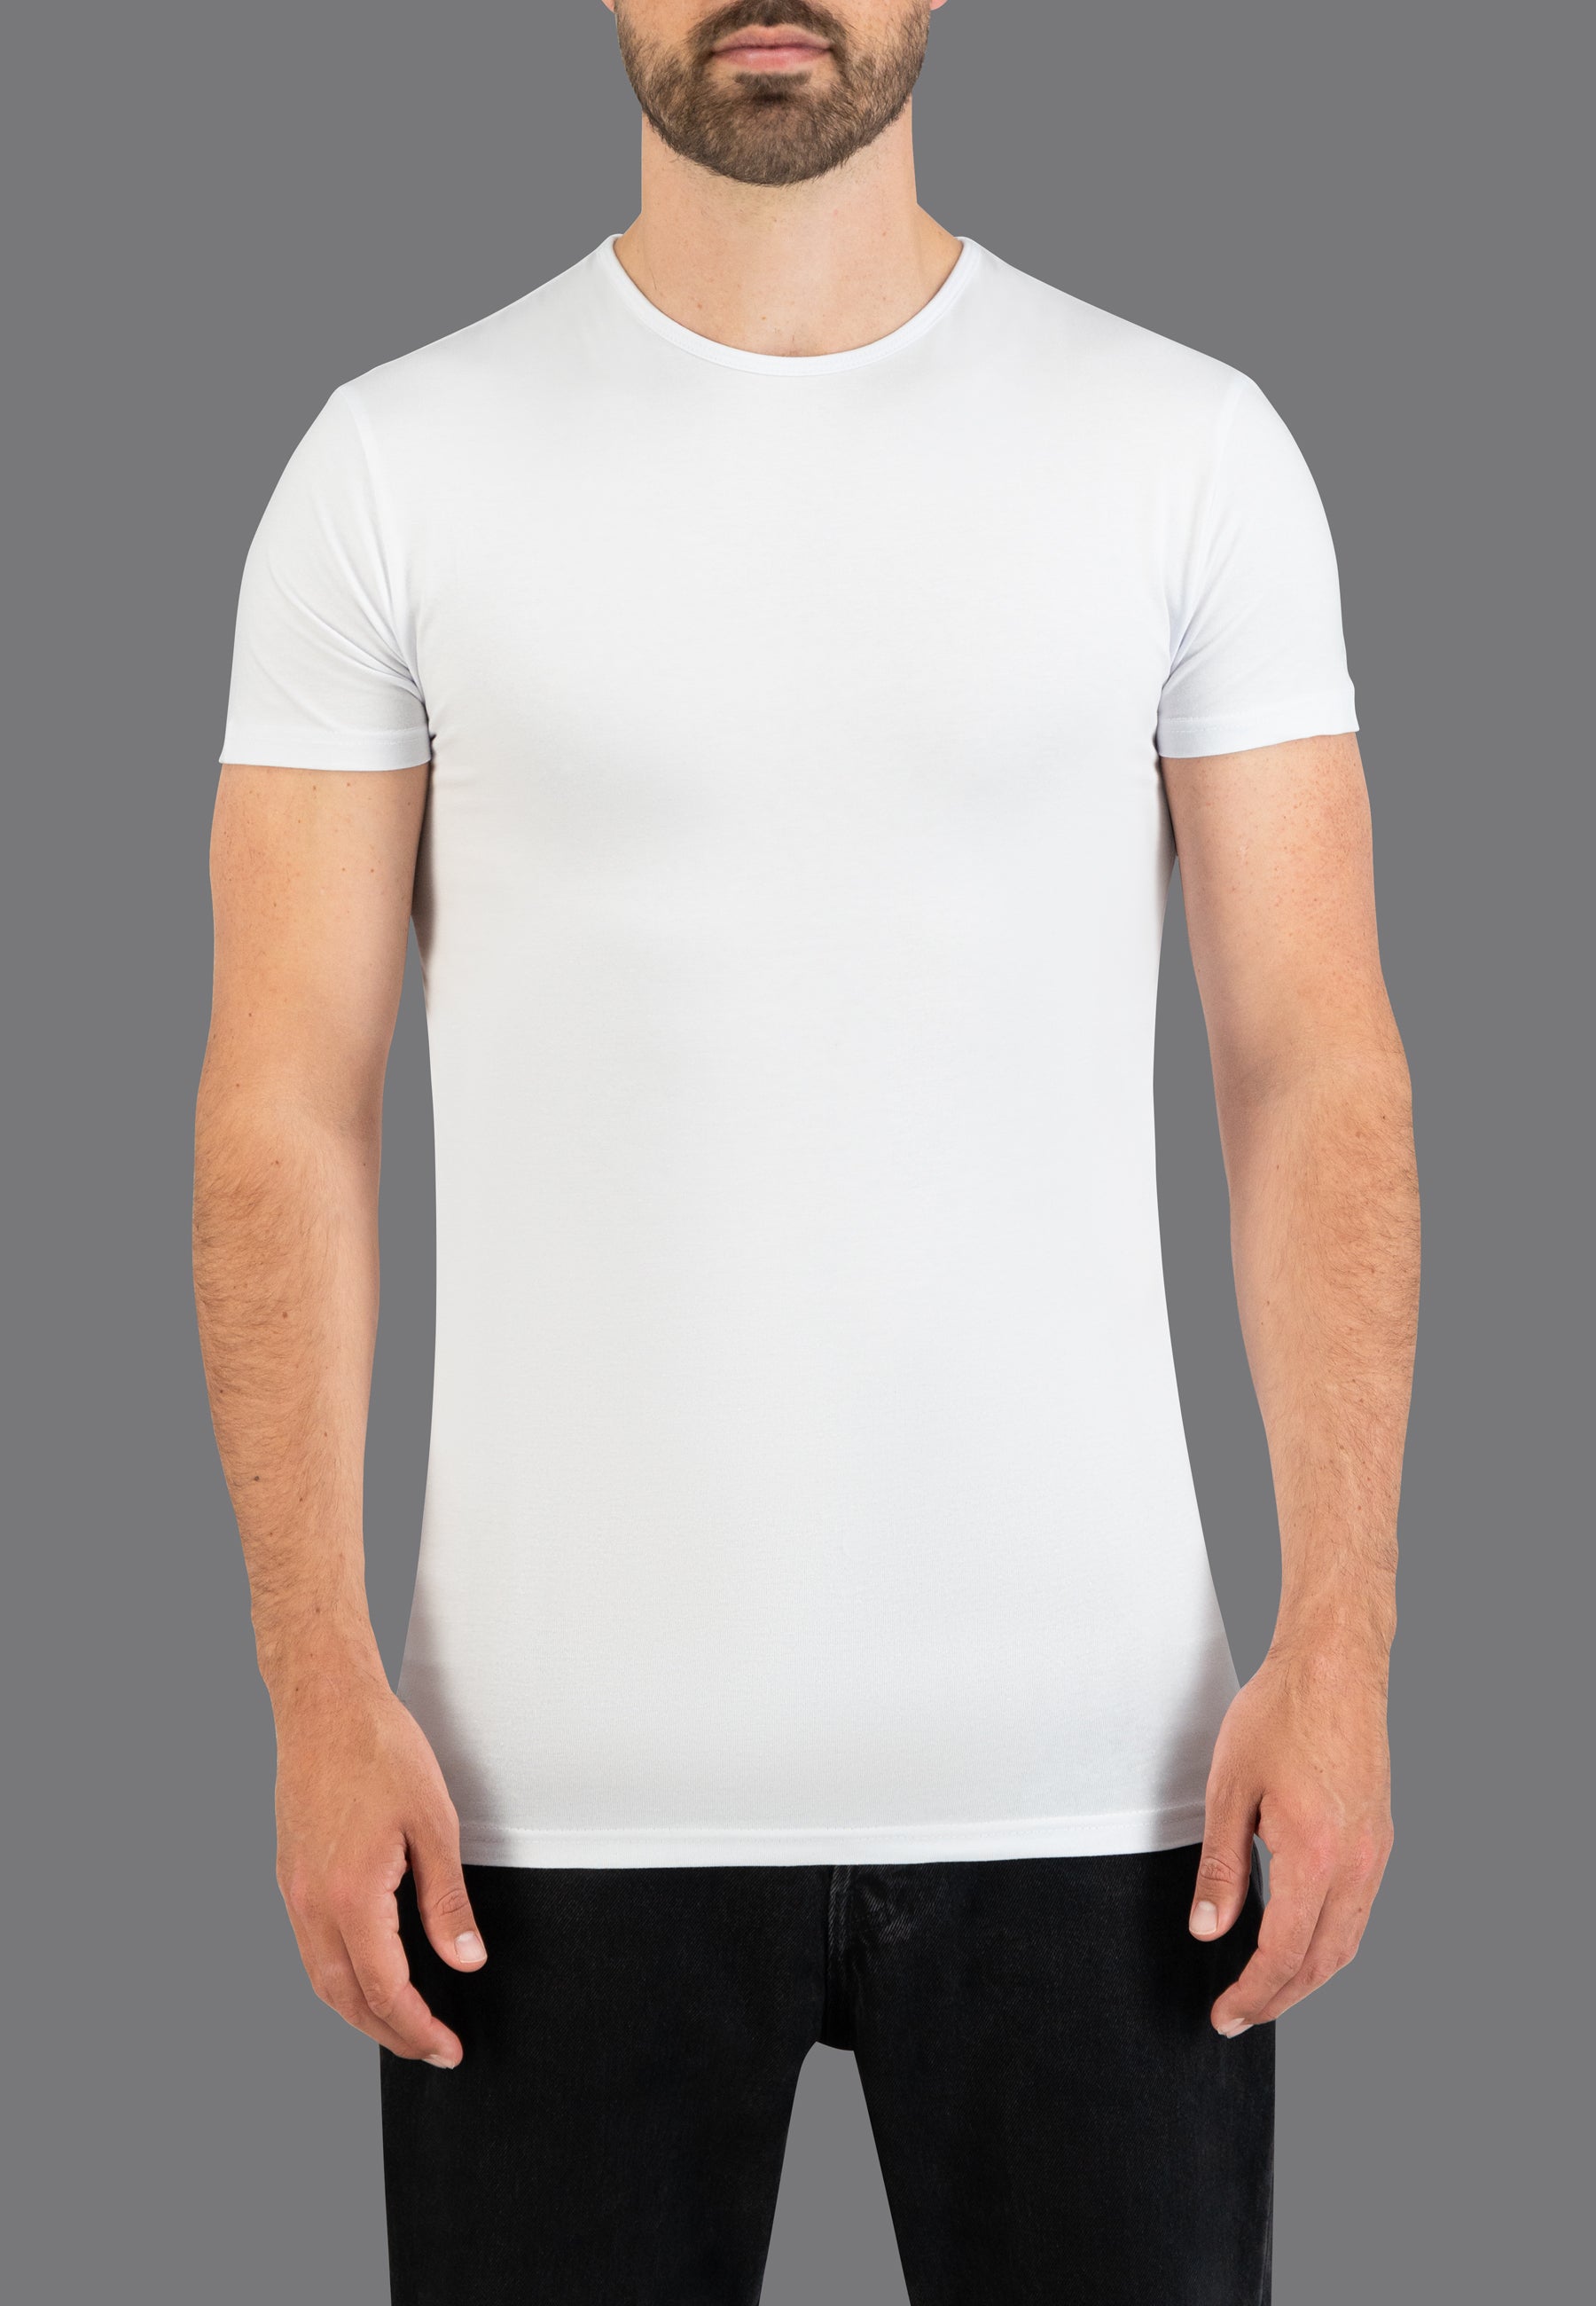 Ronde T-shirt - Slaterstore